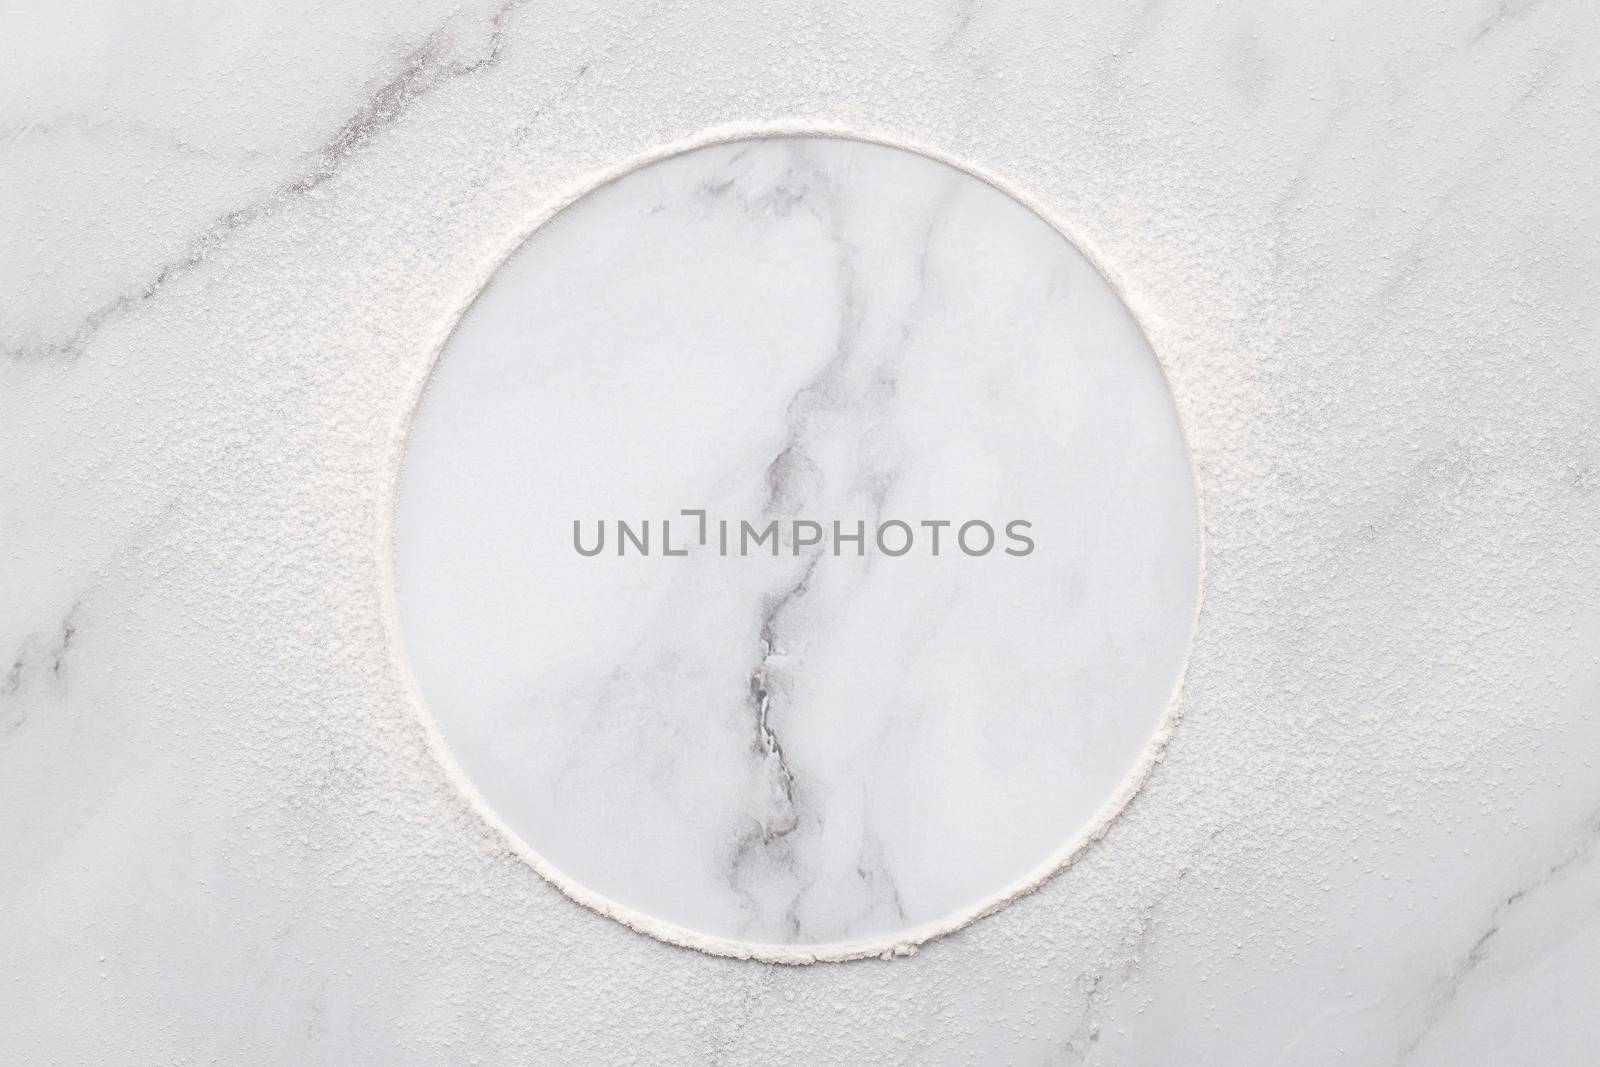 Scattered wheat flour on white marble background. Sprinkled wheat flour circle on white background.